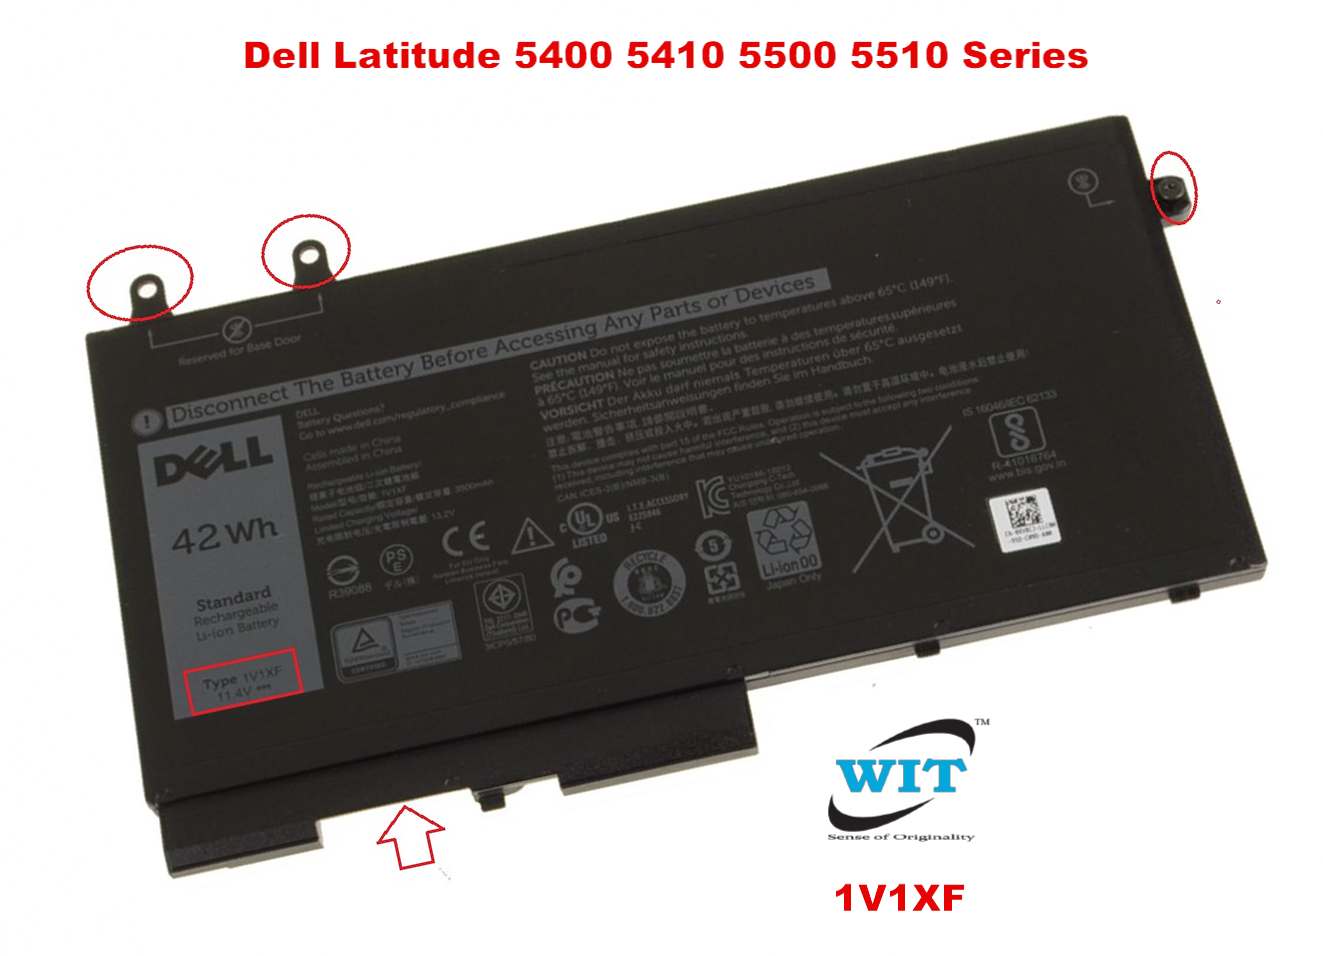 1V1XF (03 cells) Laptop Battery for Dell Latitude 5500, 5501, 5401, 5400,  5511, 5510, 5411, 5410 / Precision 3541, 3540, 3550 / Inspiron 7591 2-in-1  / Latitude 5400 Chromebook Enterprise - WIT Computers